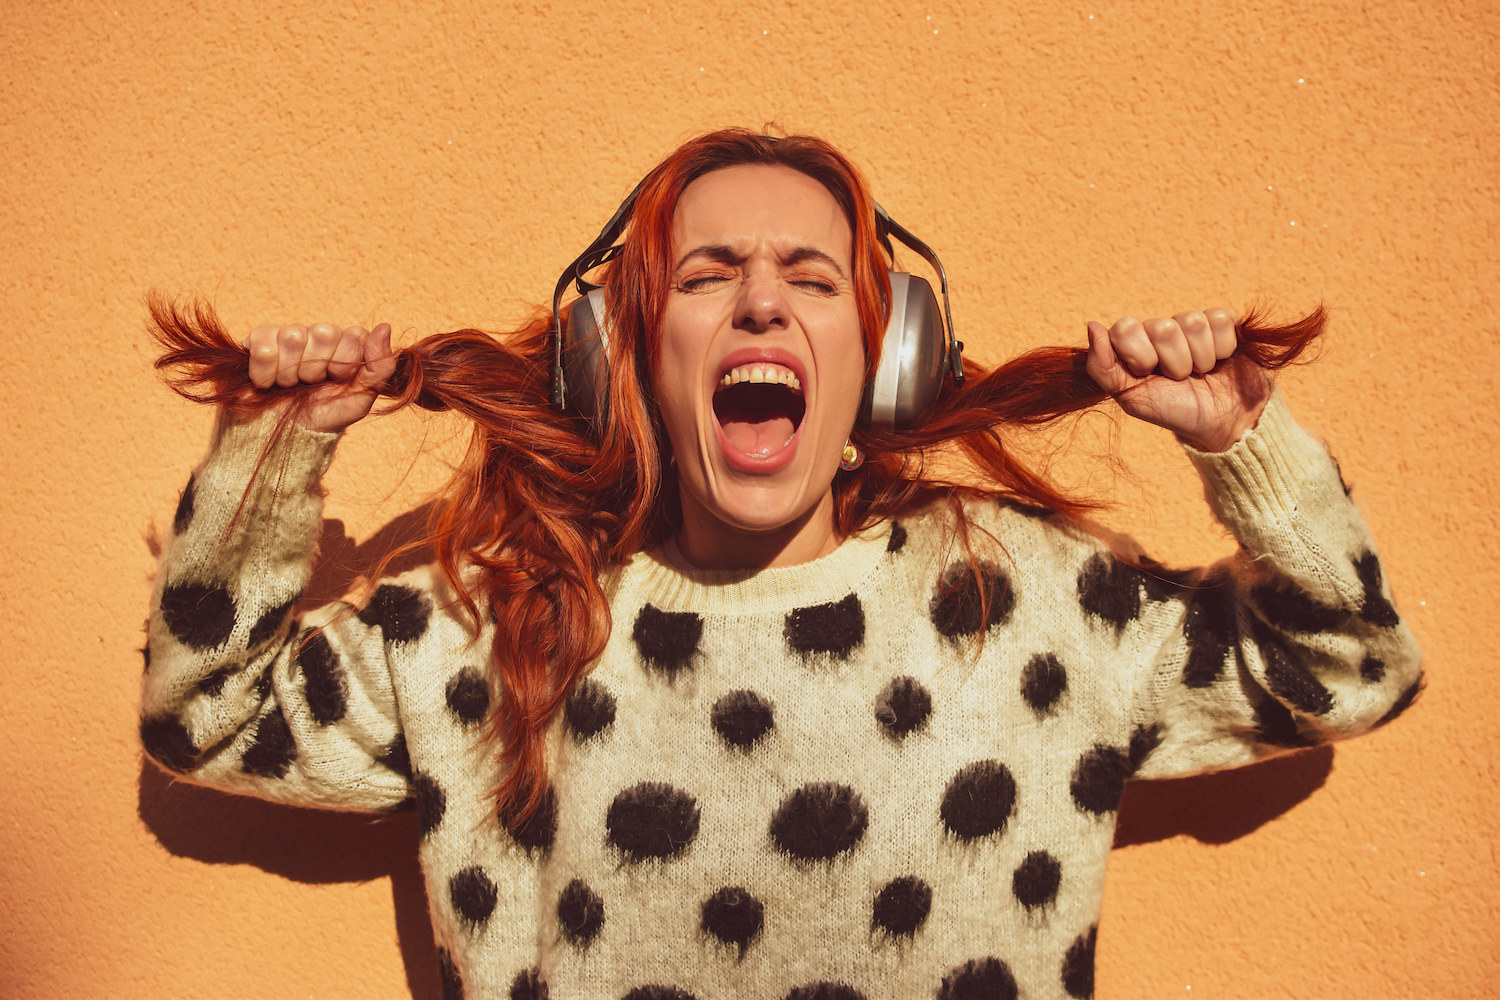 A woman pulling her hair and yelling while listening to music on her headphones